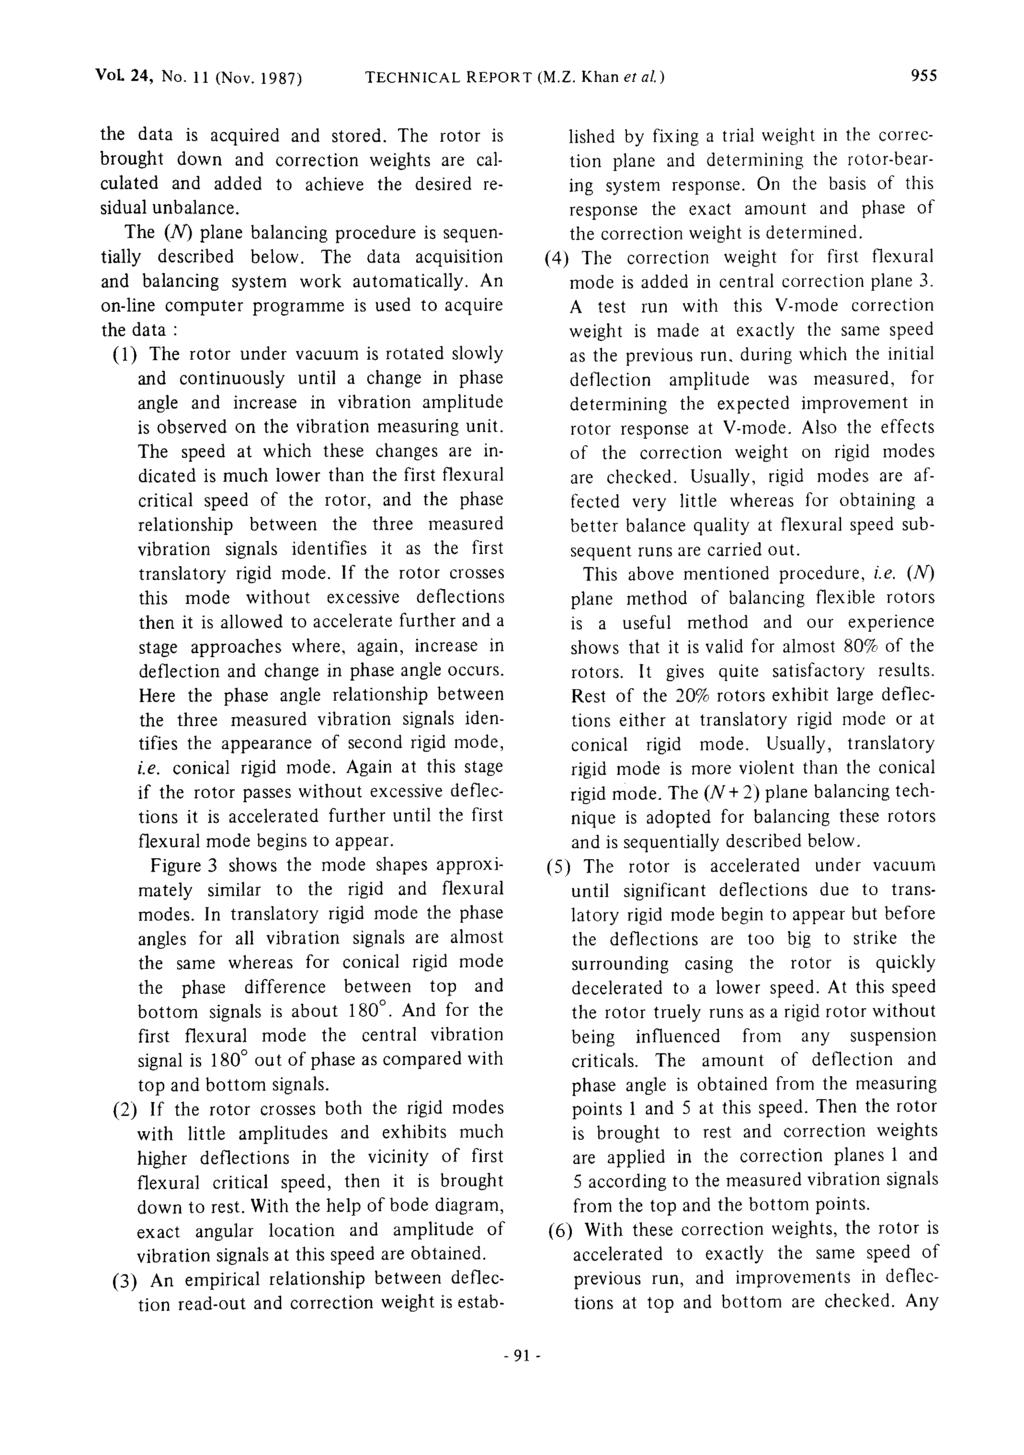 Vol. 24, No. 11 (Nov. 1987) TECHNICAL REPORT (M.Z. Khan et al.) 955 the data is acquired and stored.